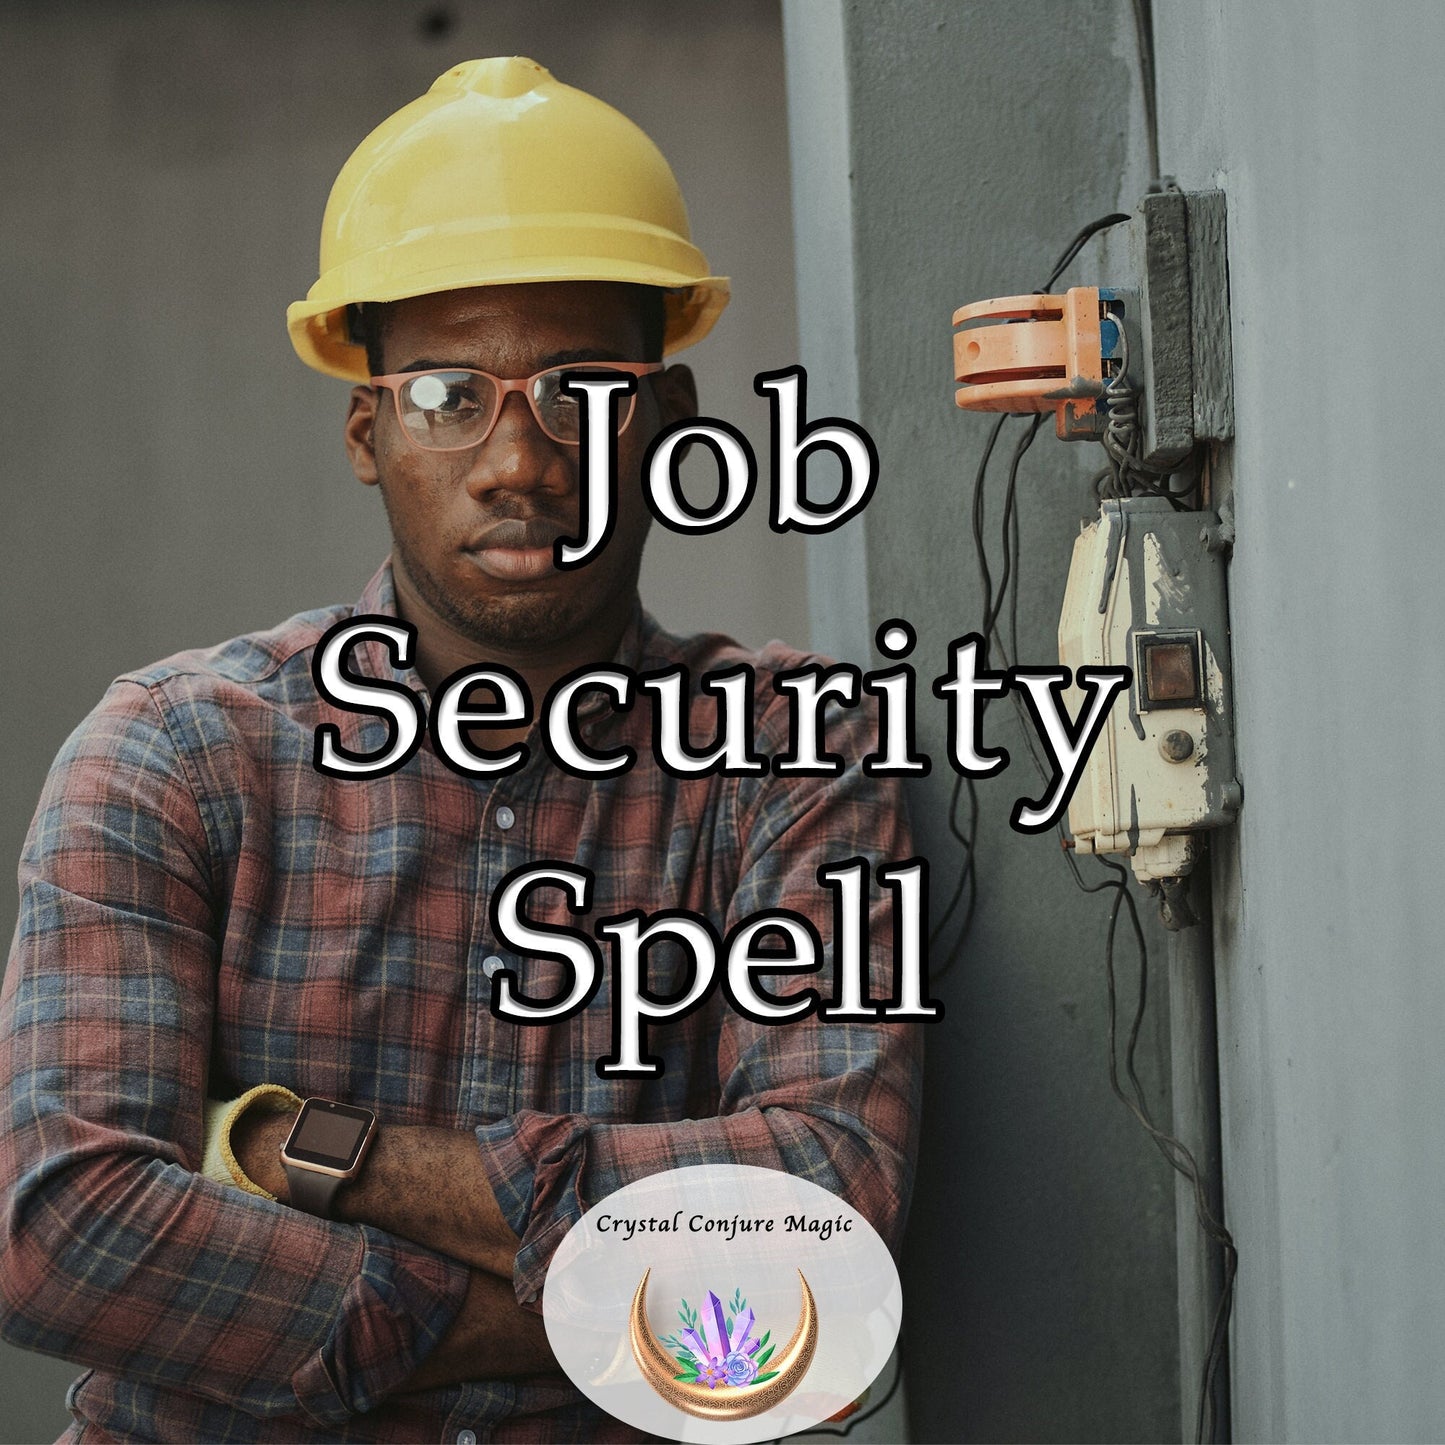 Job Security Spell - Job protection spell - keep the job, and job security you and your family need